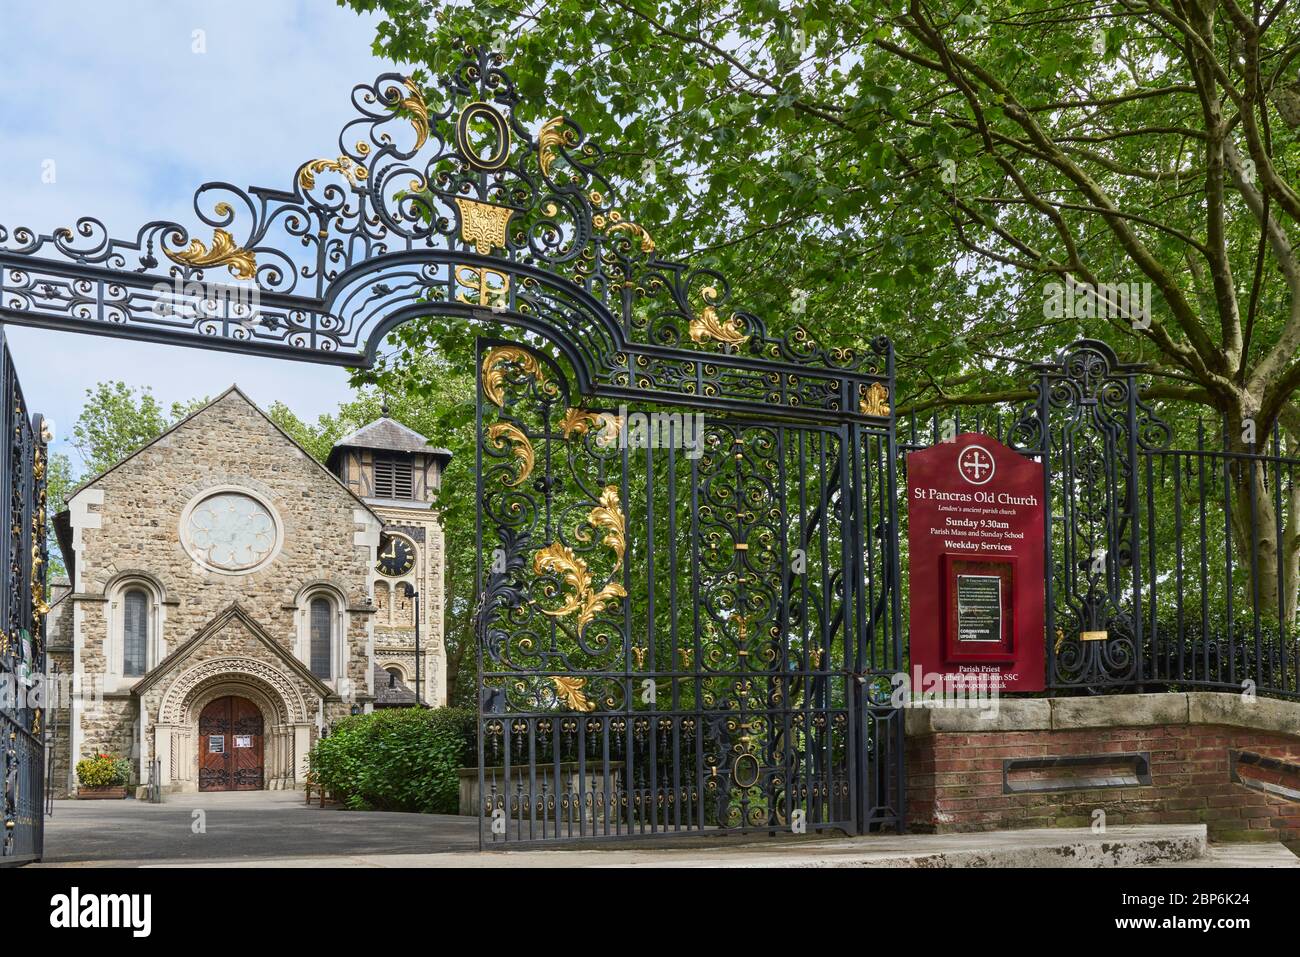 The historic Old St Pancras church in Somers Town, Camden, North London UK, viewed from the entrance gate Stock Photo